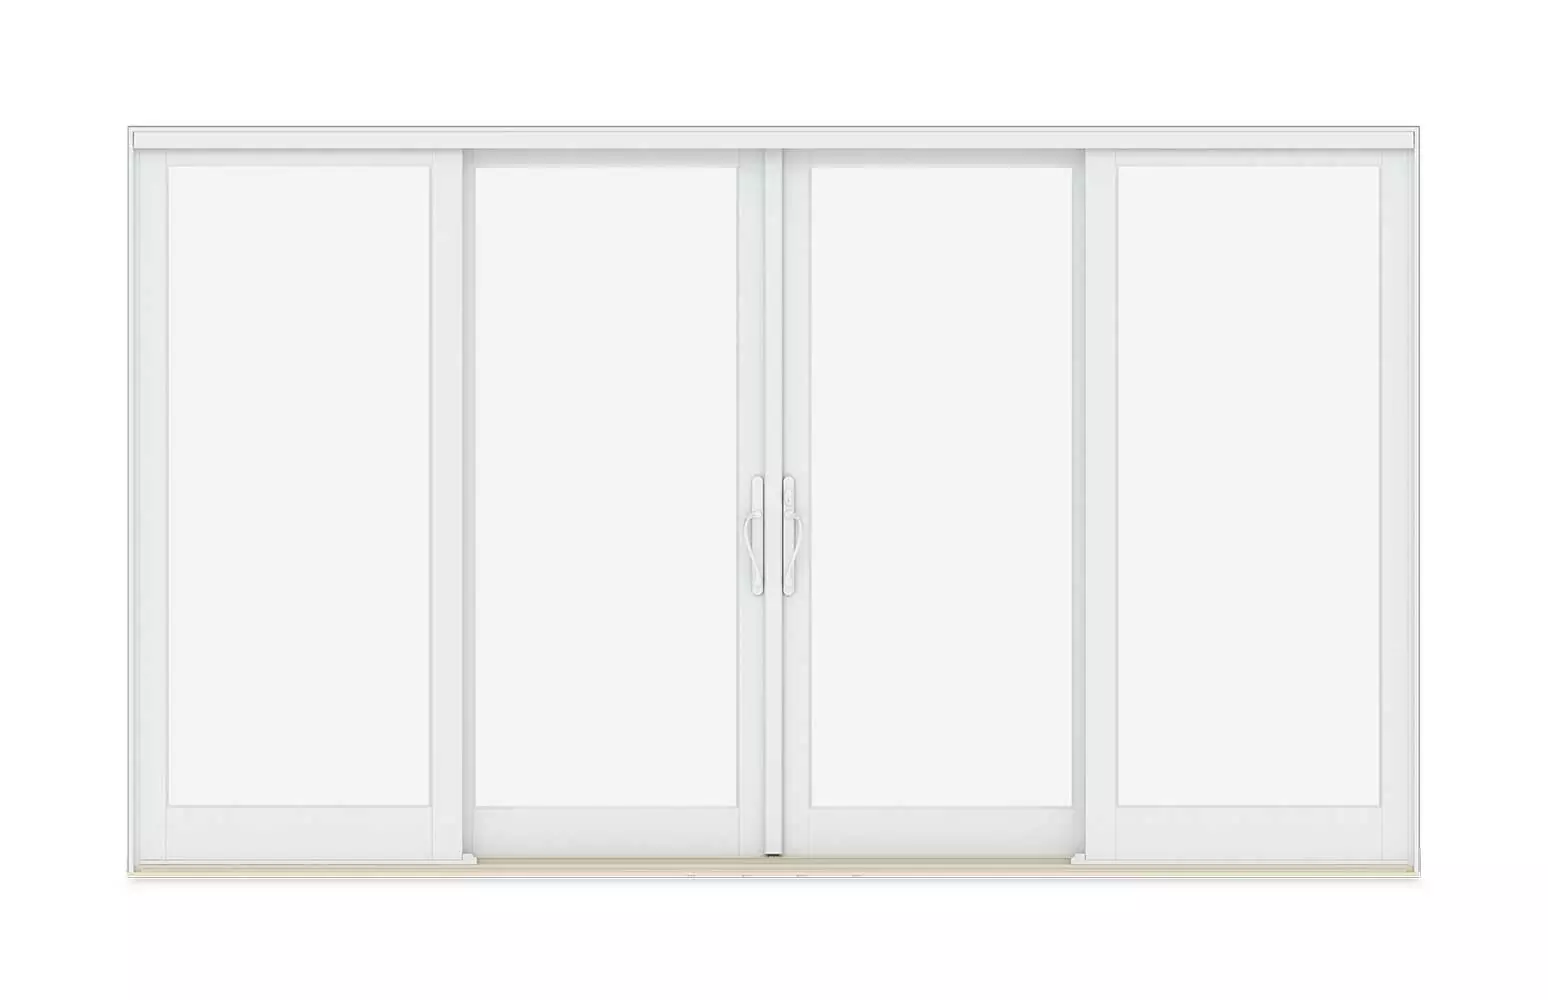 Four-Panel Sliding French door with operating center units